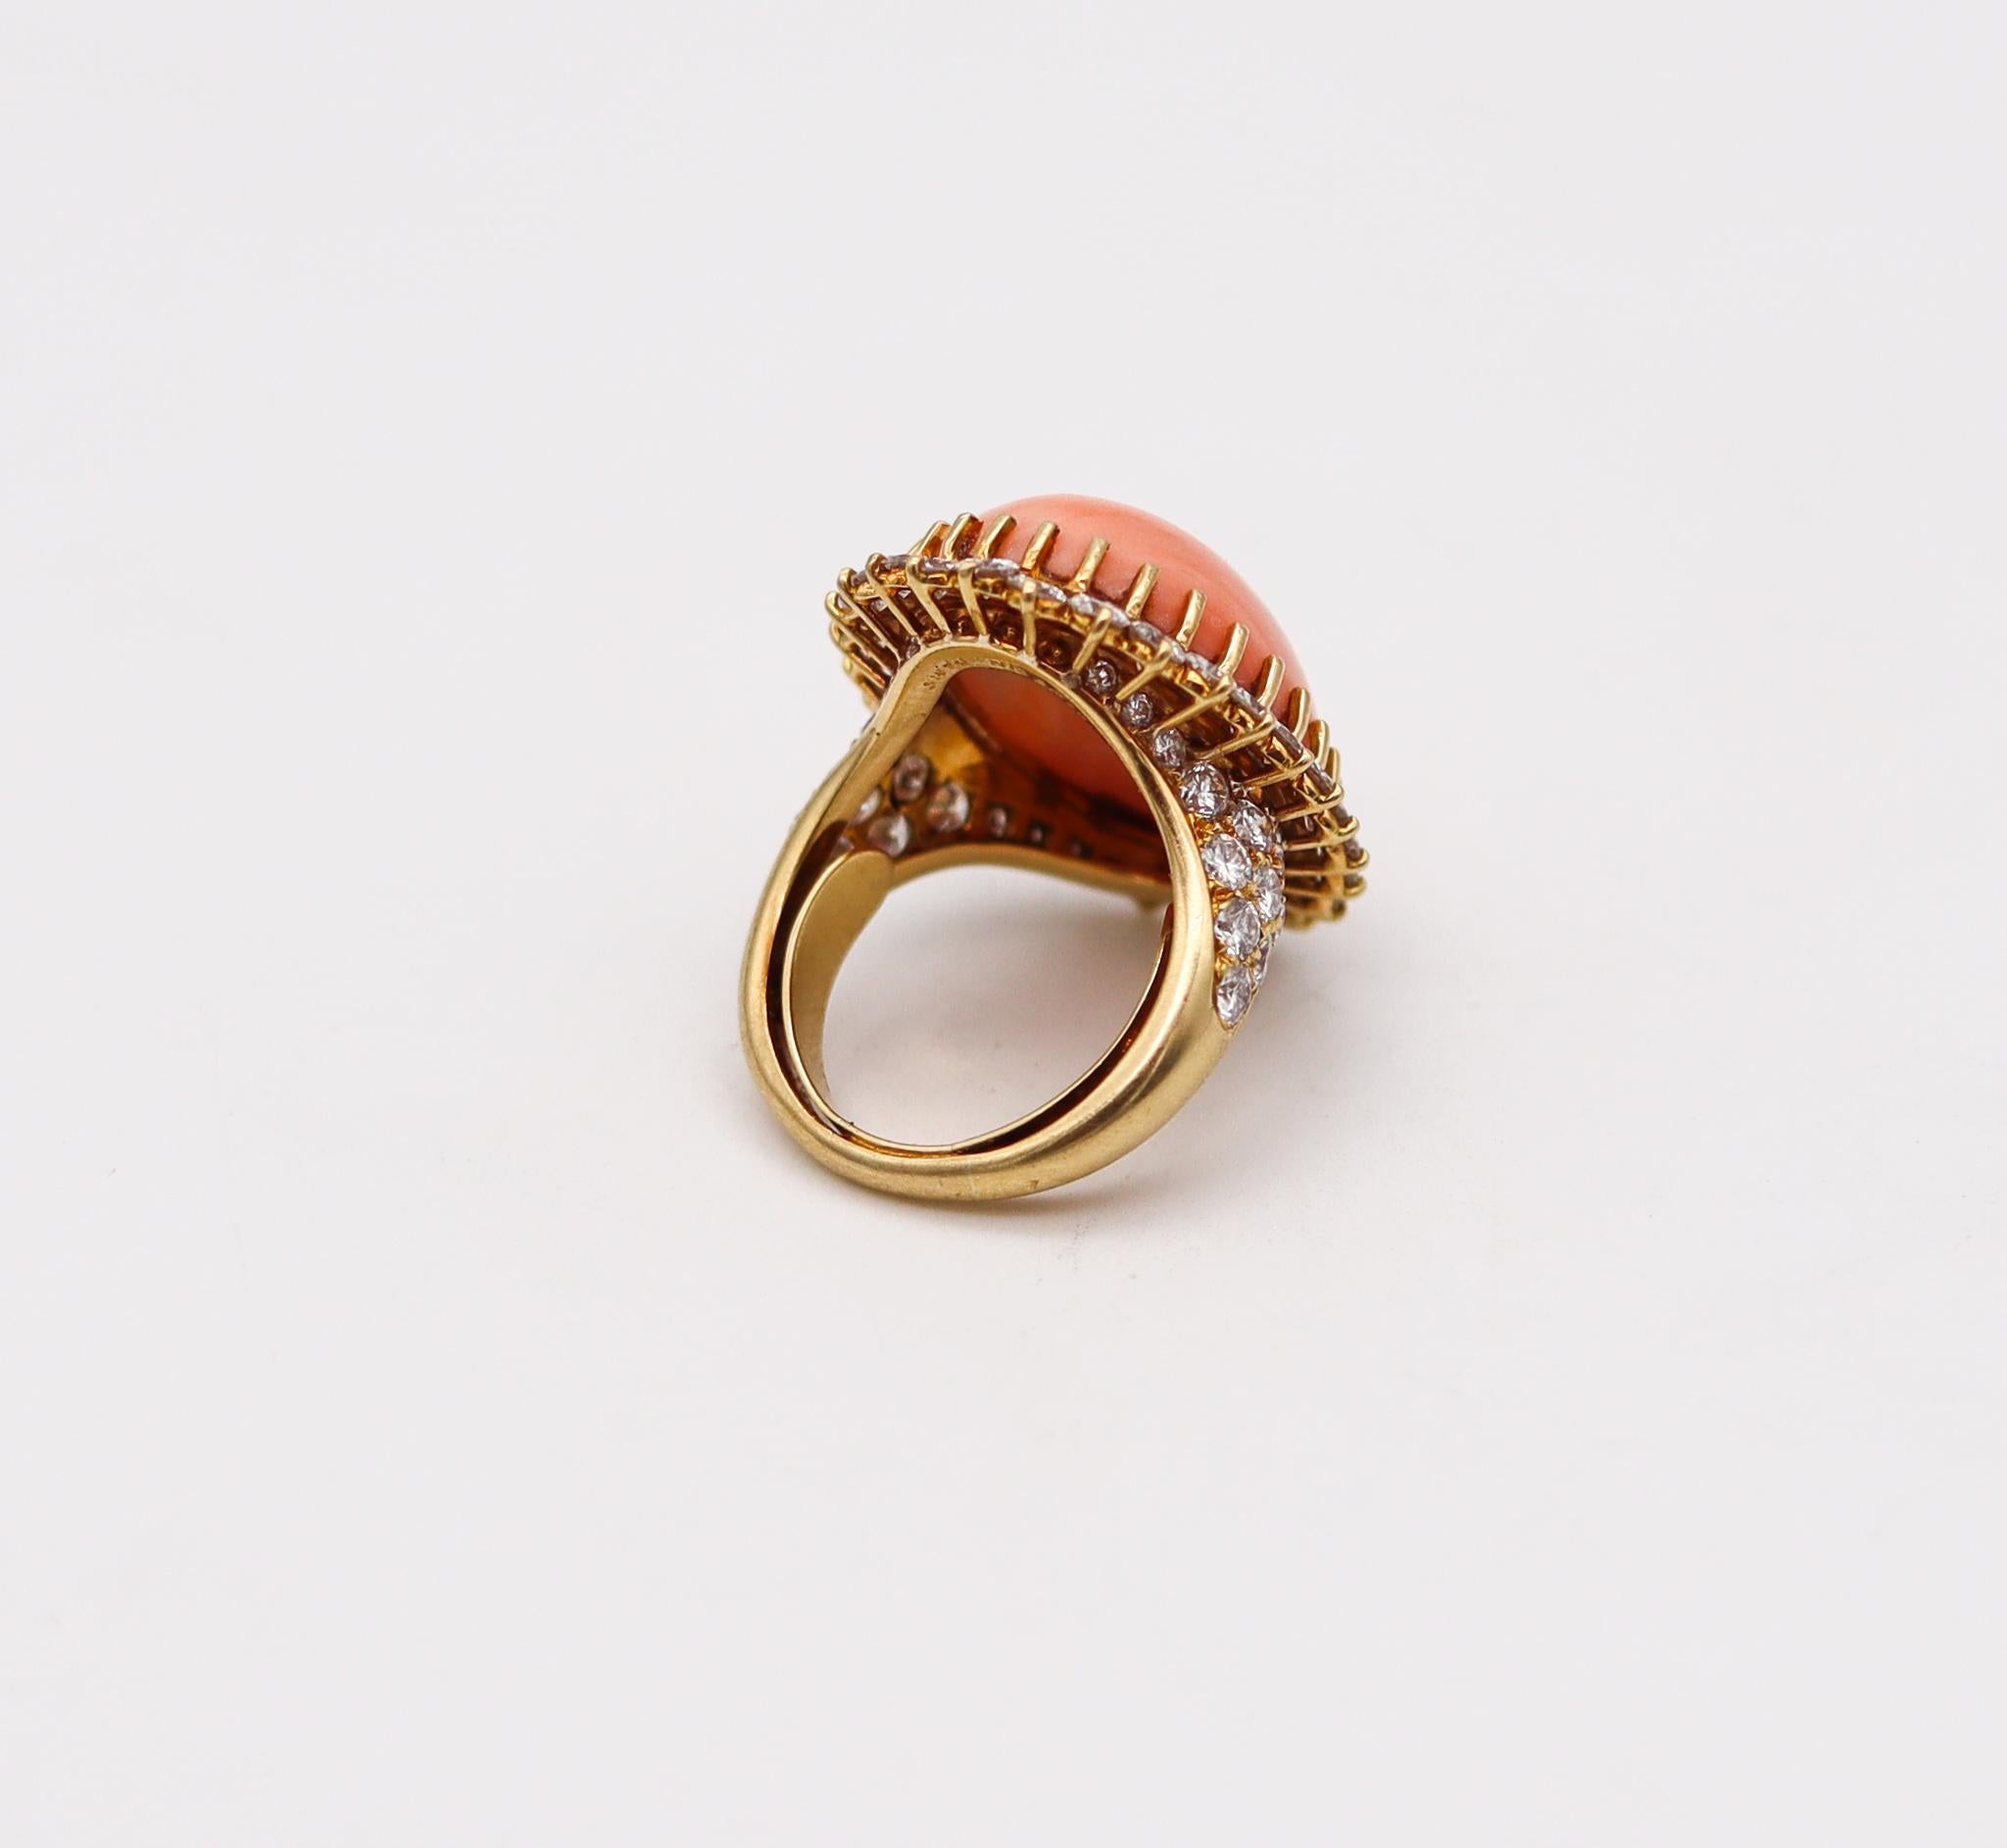 Mauboussin 1970 Paris Coral Cocktail Ring 18Kt Gold 28.66 Ctw Diamonds And Coral In Excellent Condition For Sale In Miami, FL